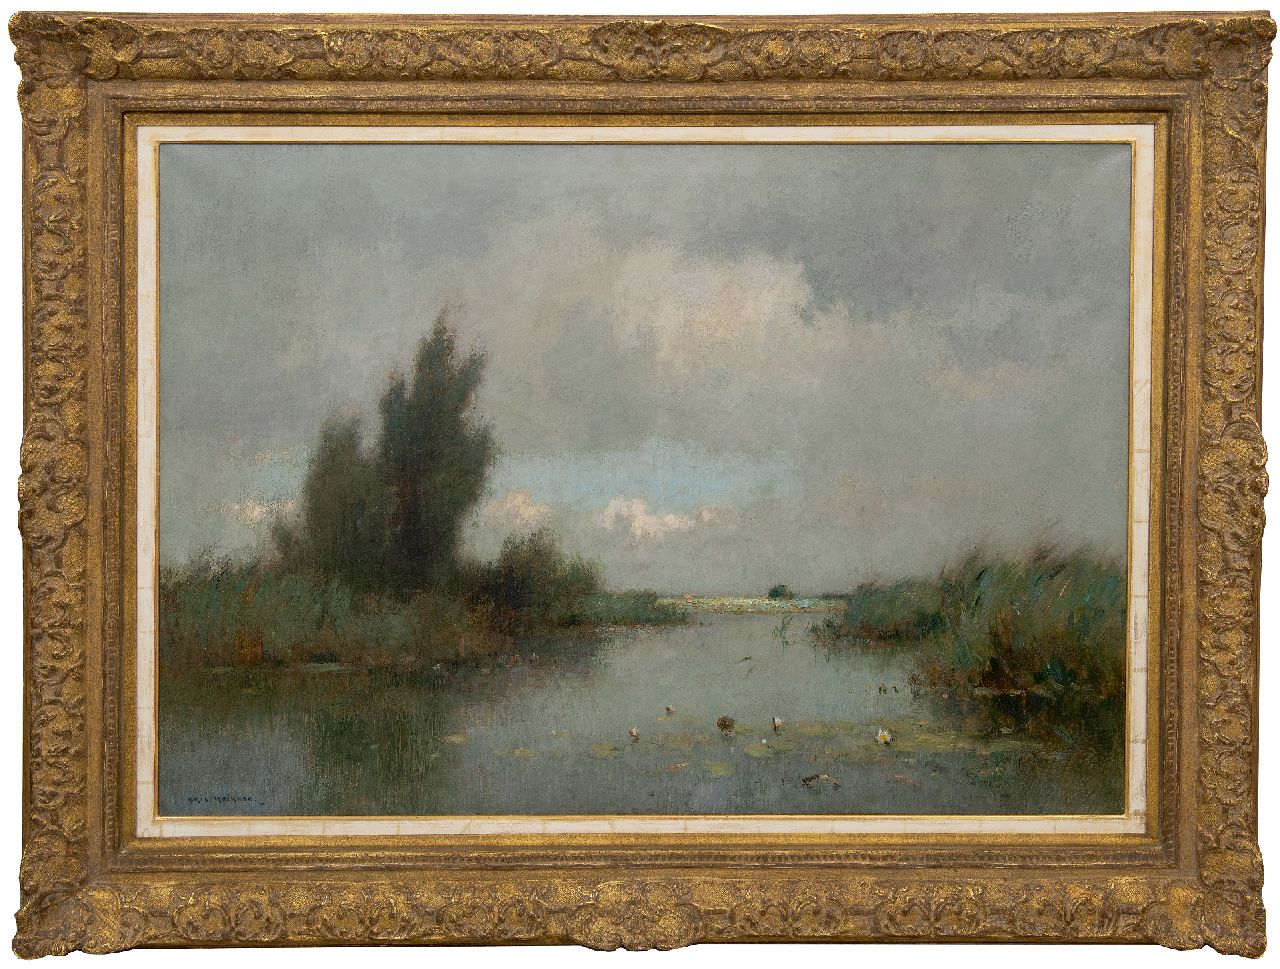 Knikker A.  | Aris Knikker | Paintings offered for sale | A polder landscape with water lilies, oil on canvas 70.3 x 100.4 cm, signed l.l.